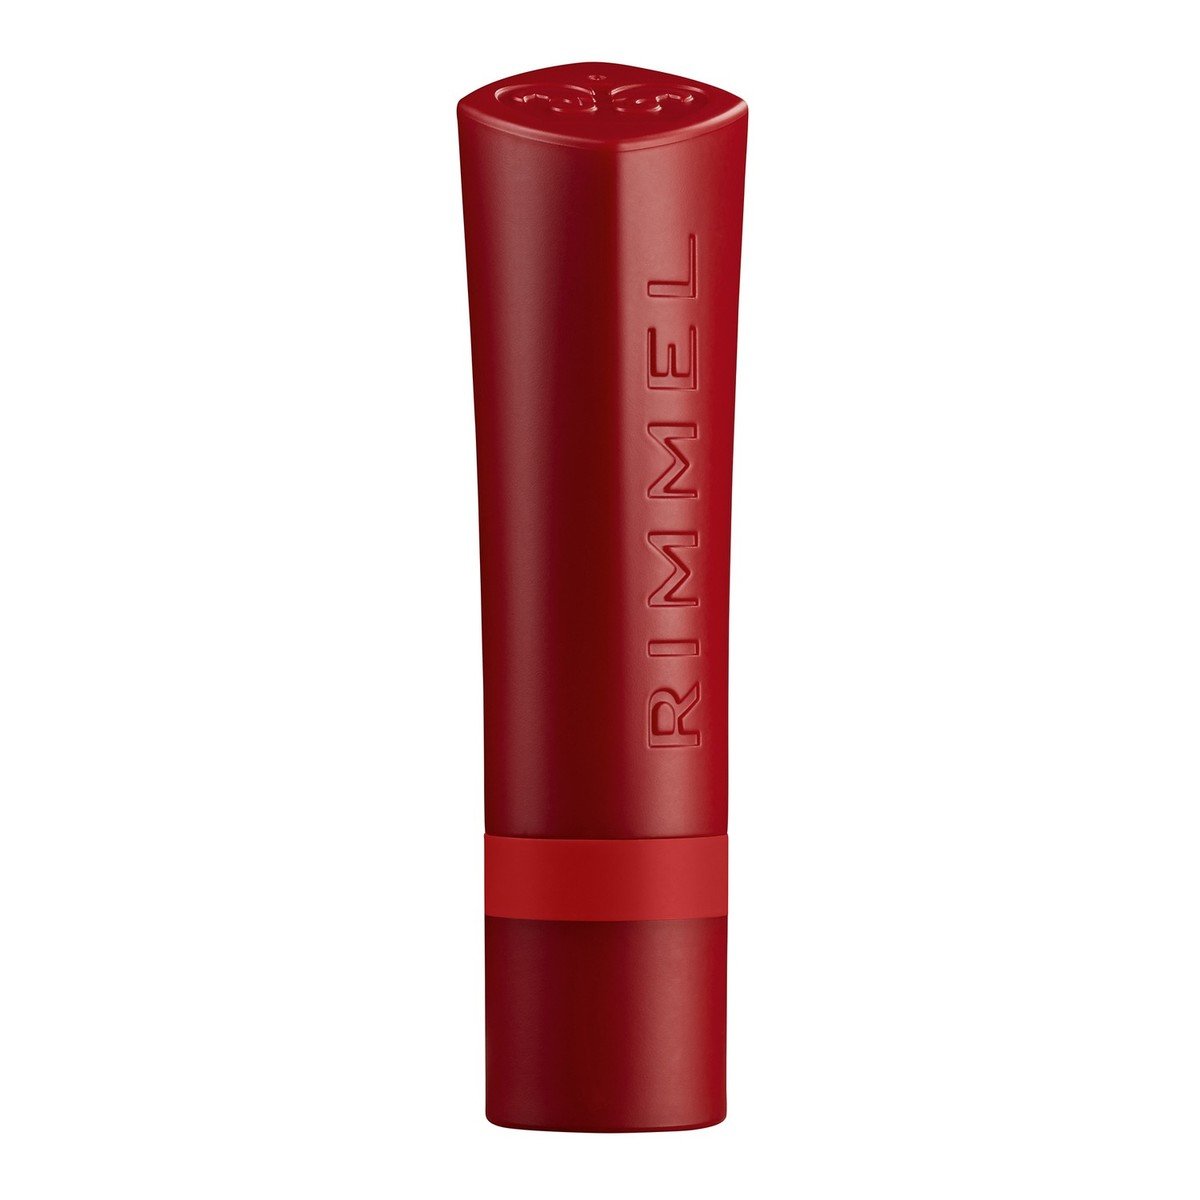 Rimmel London The Only 1 Matte Lipstick -Take The Stage 1pc